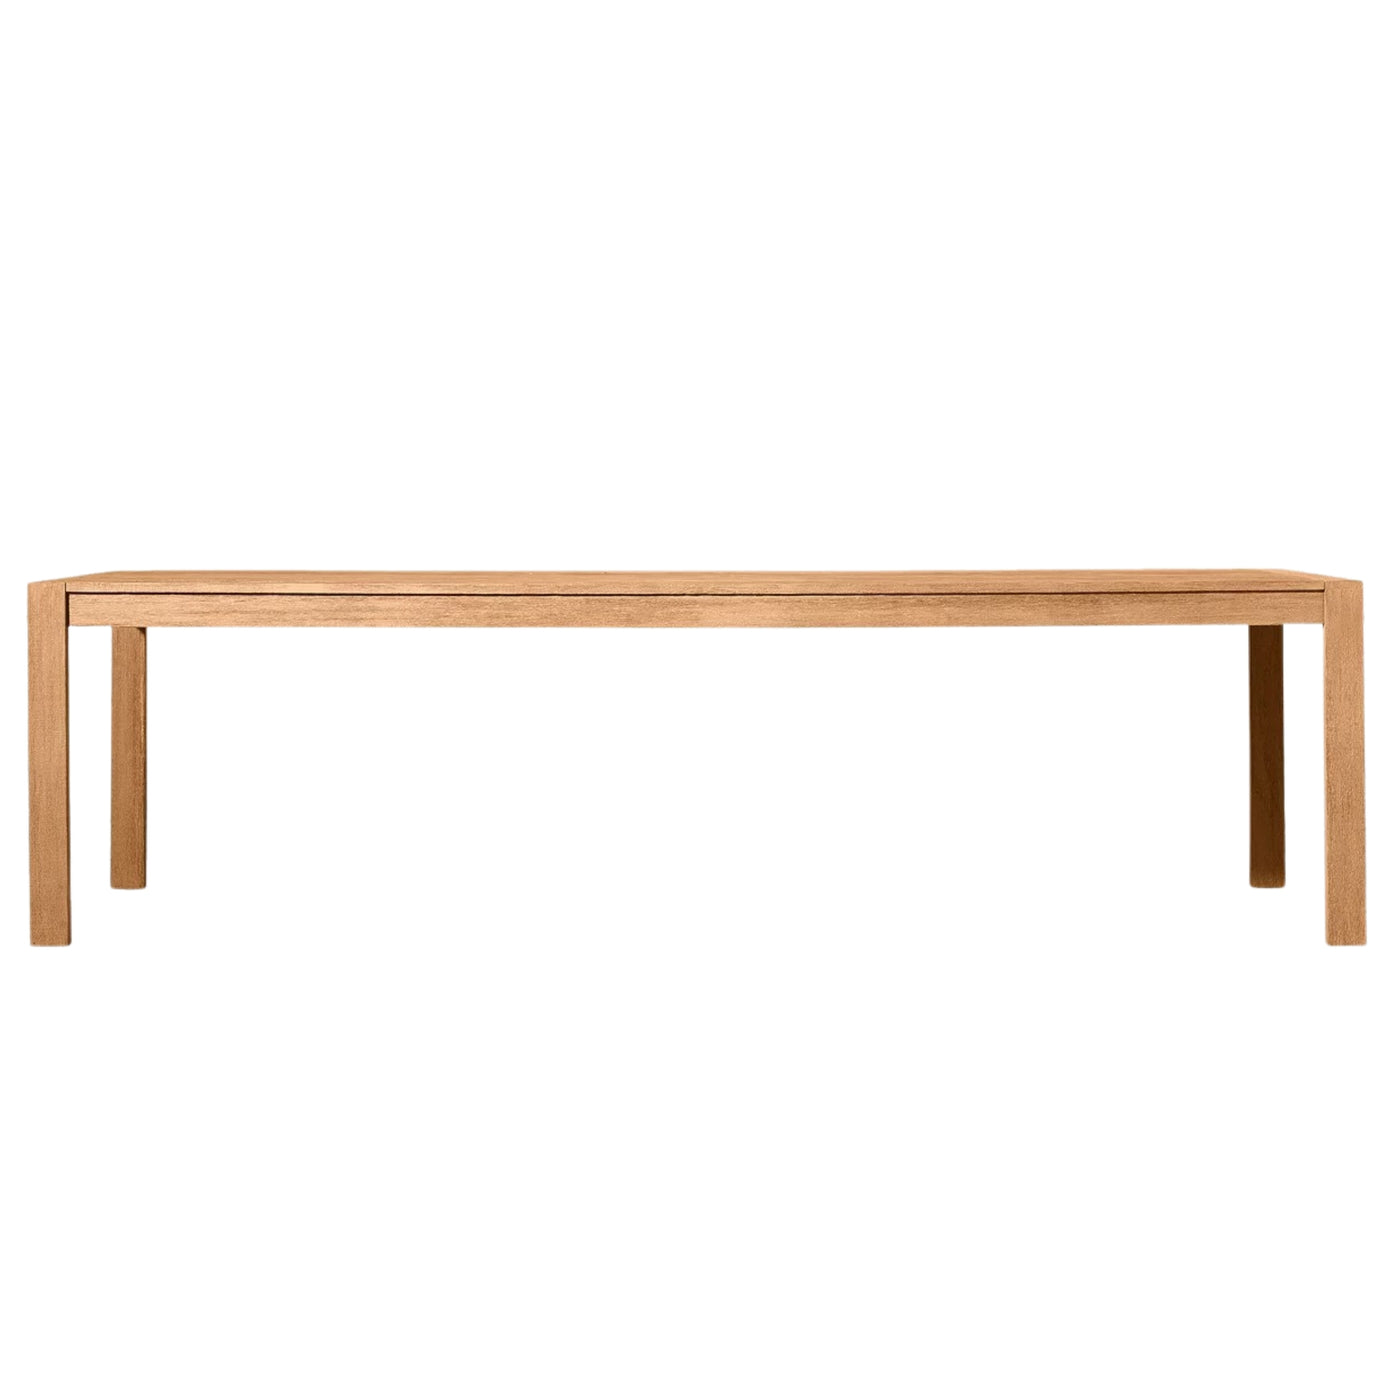 Rolfo Teak Natural Dining Table